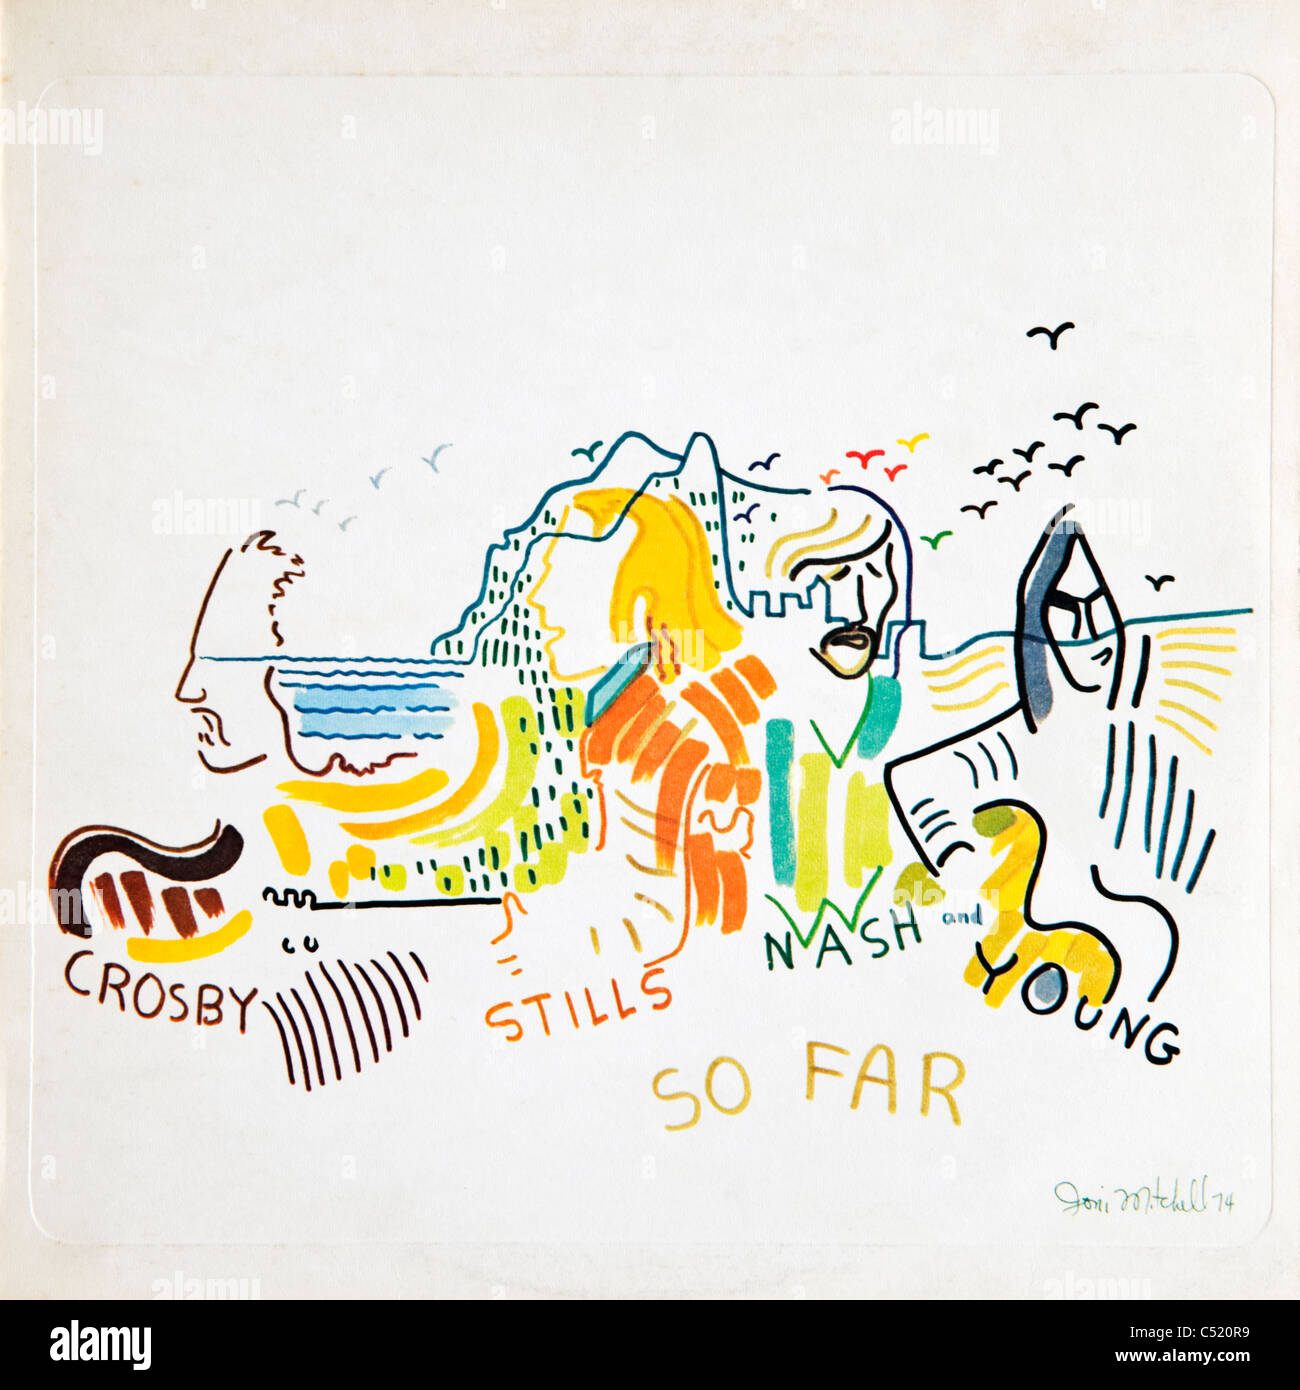 Cover of vinyl album So Far by Crosby Stills Nash and Young released 1974 on Atlantic Records cover by Joni Mitchell Stock Photo